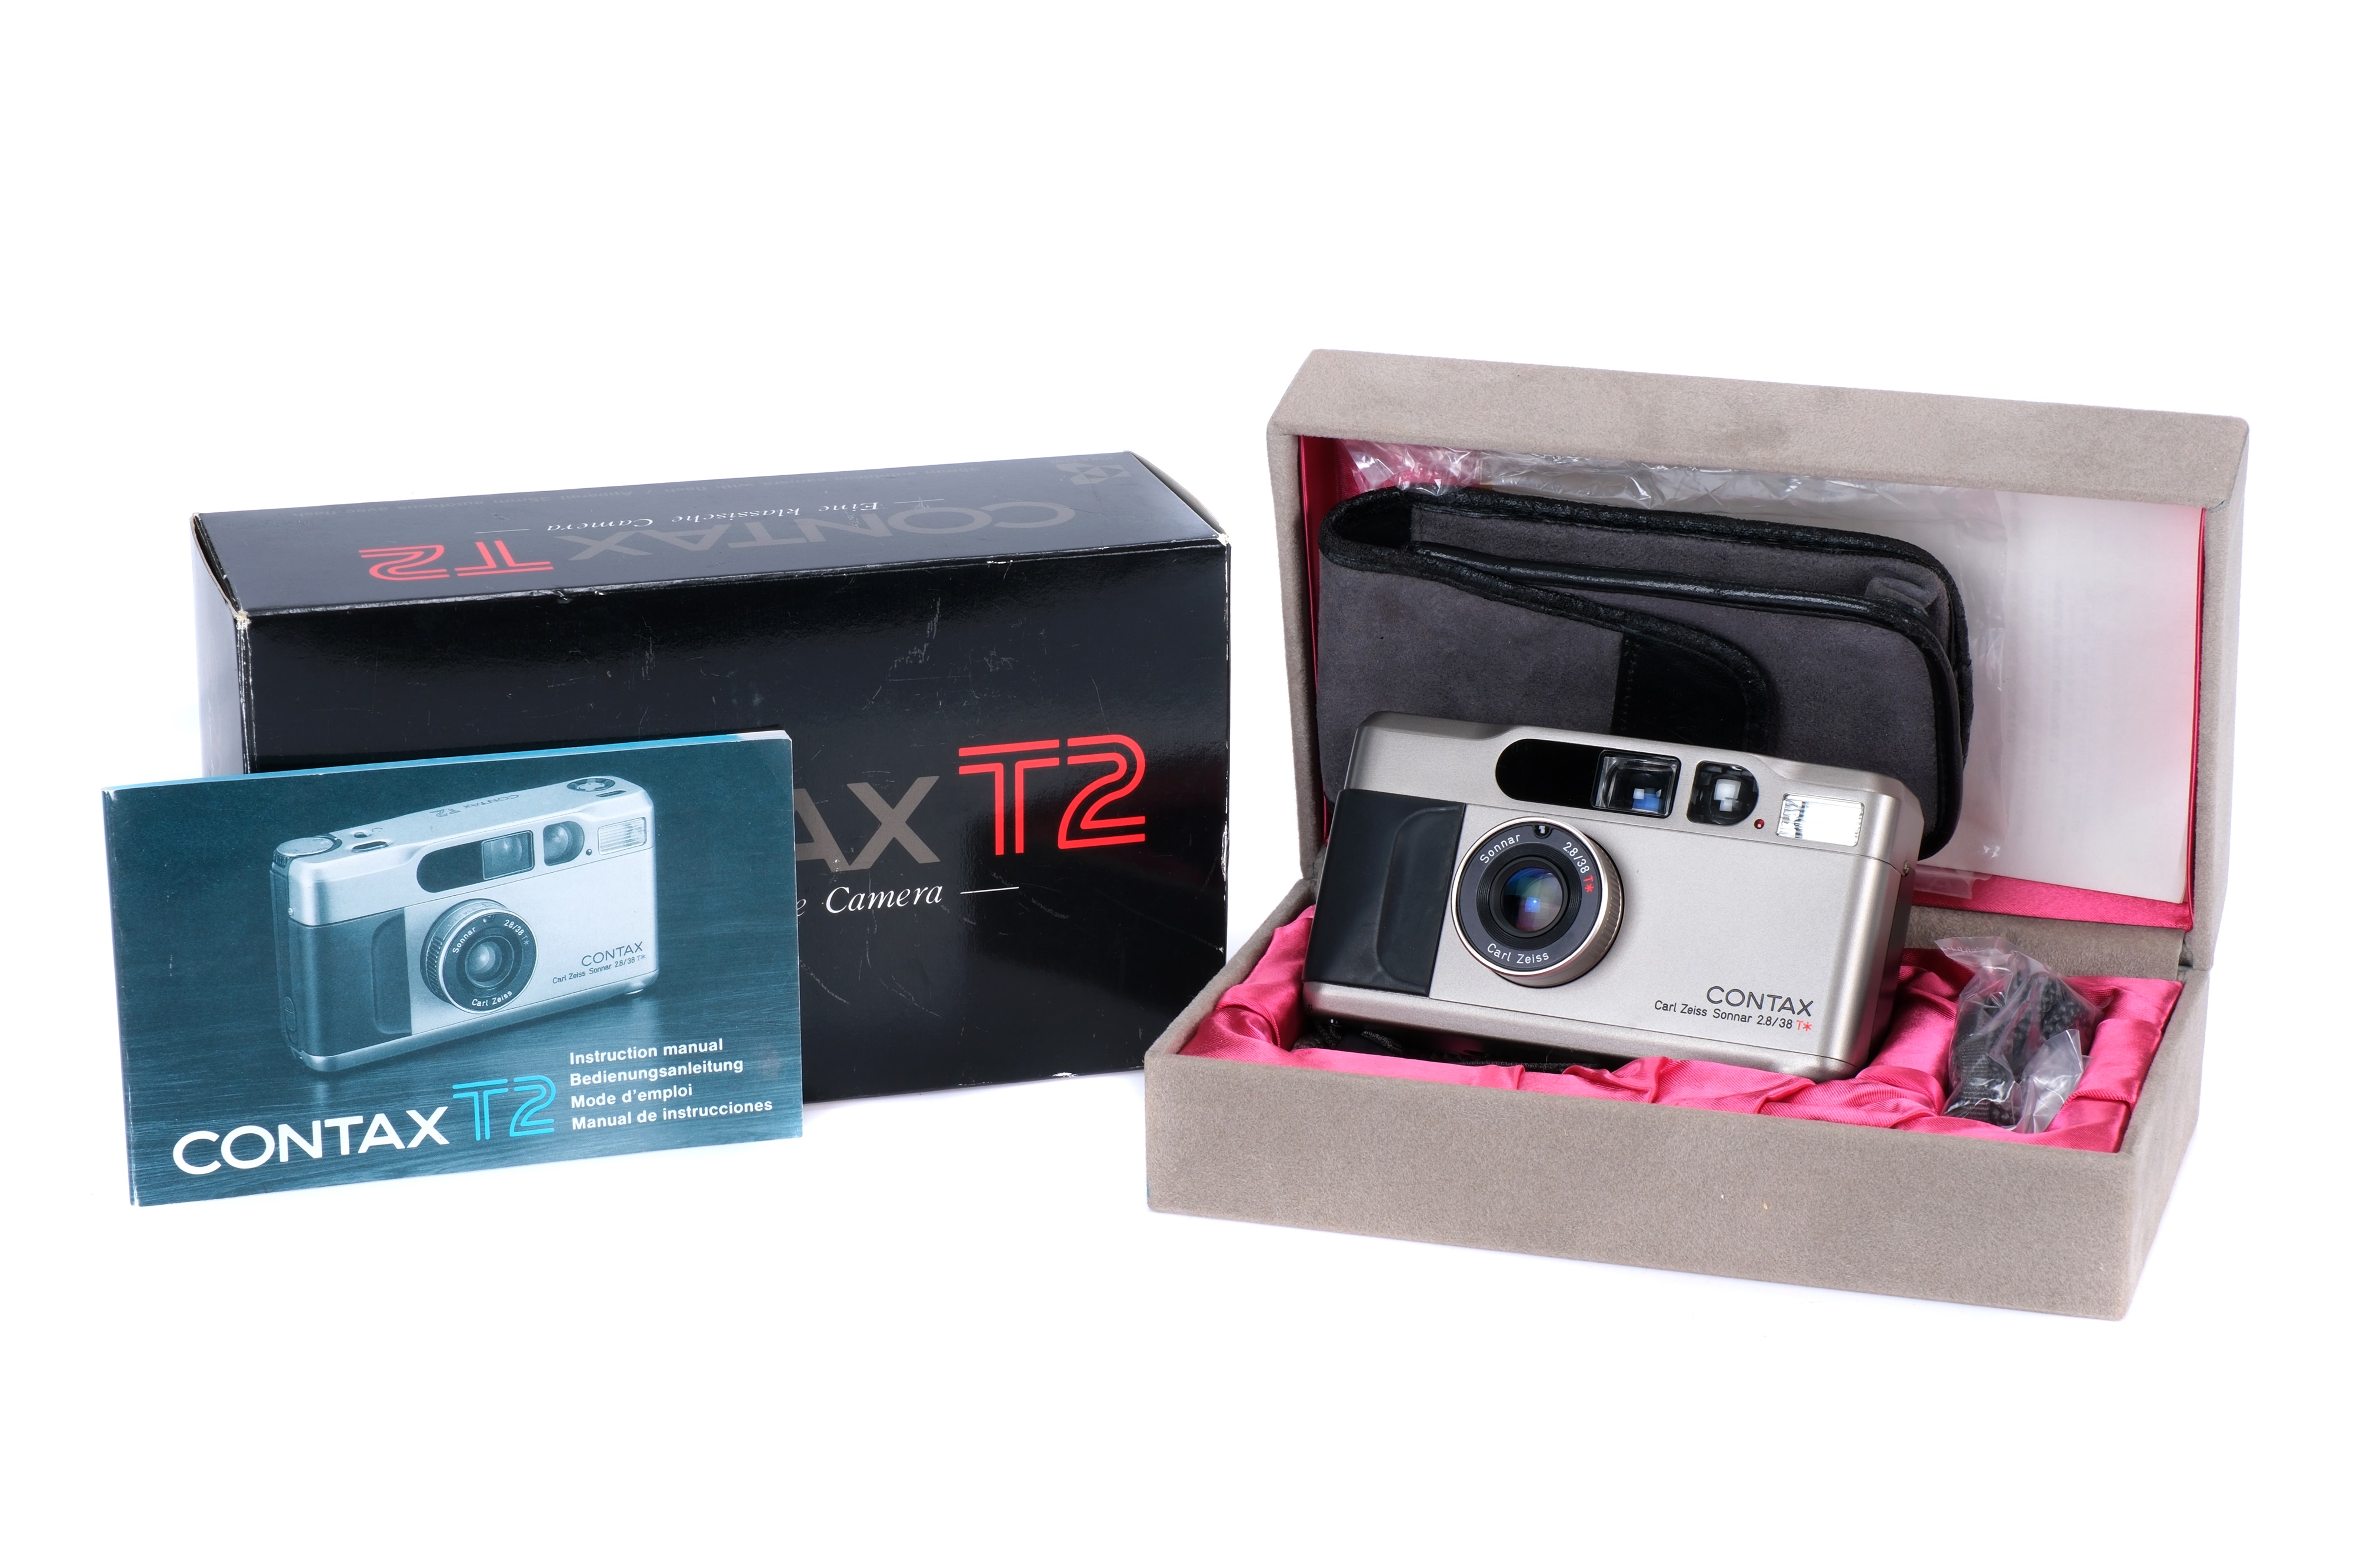 A Contax T2 Compact 35mm Camera,